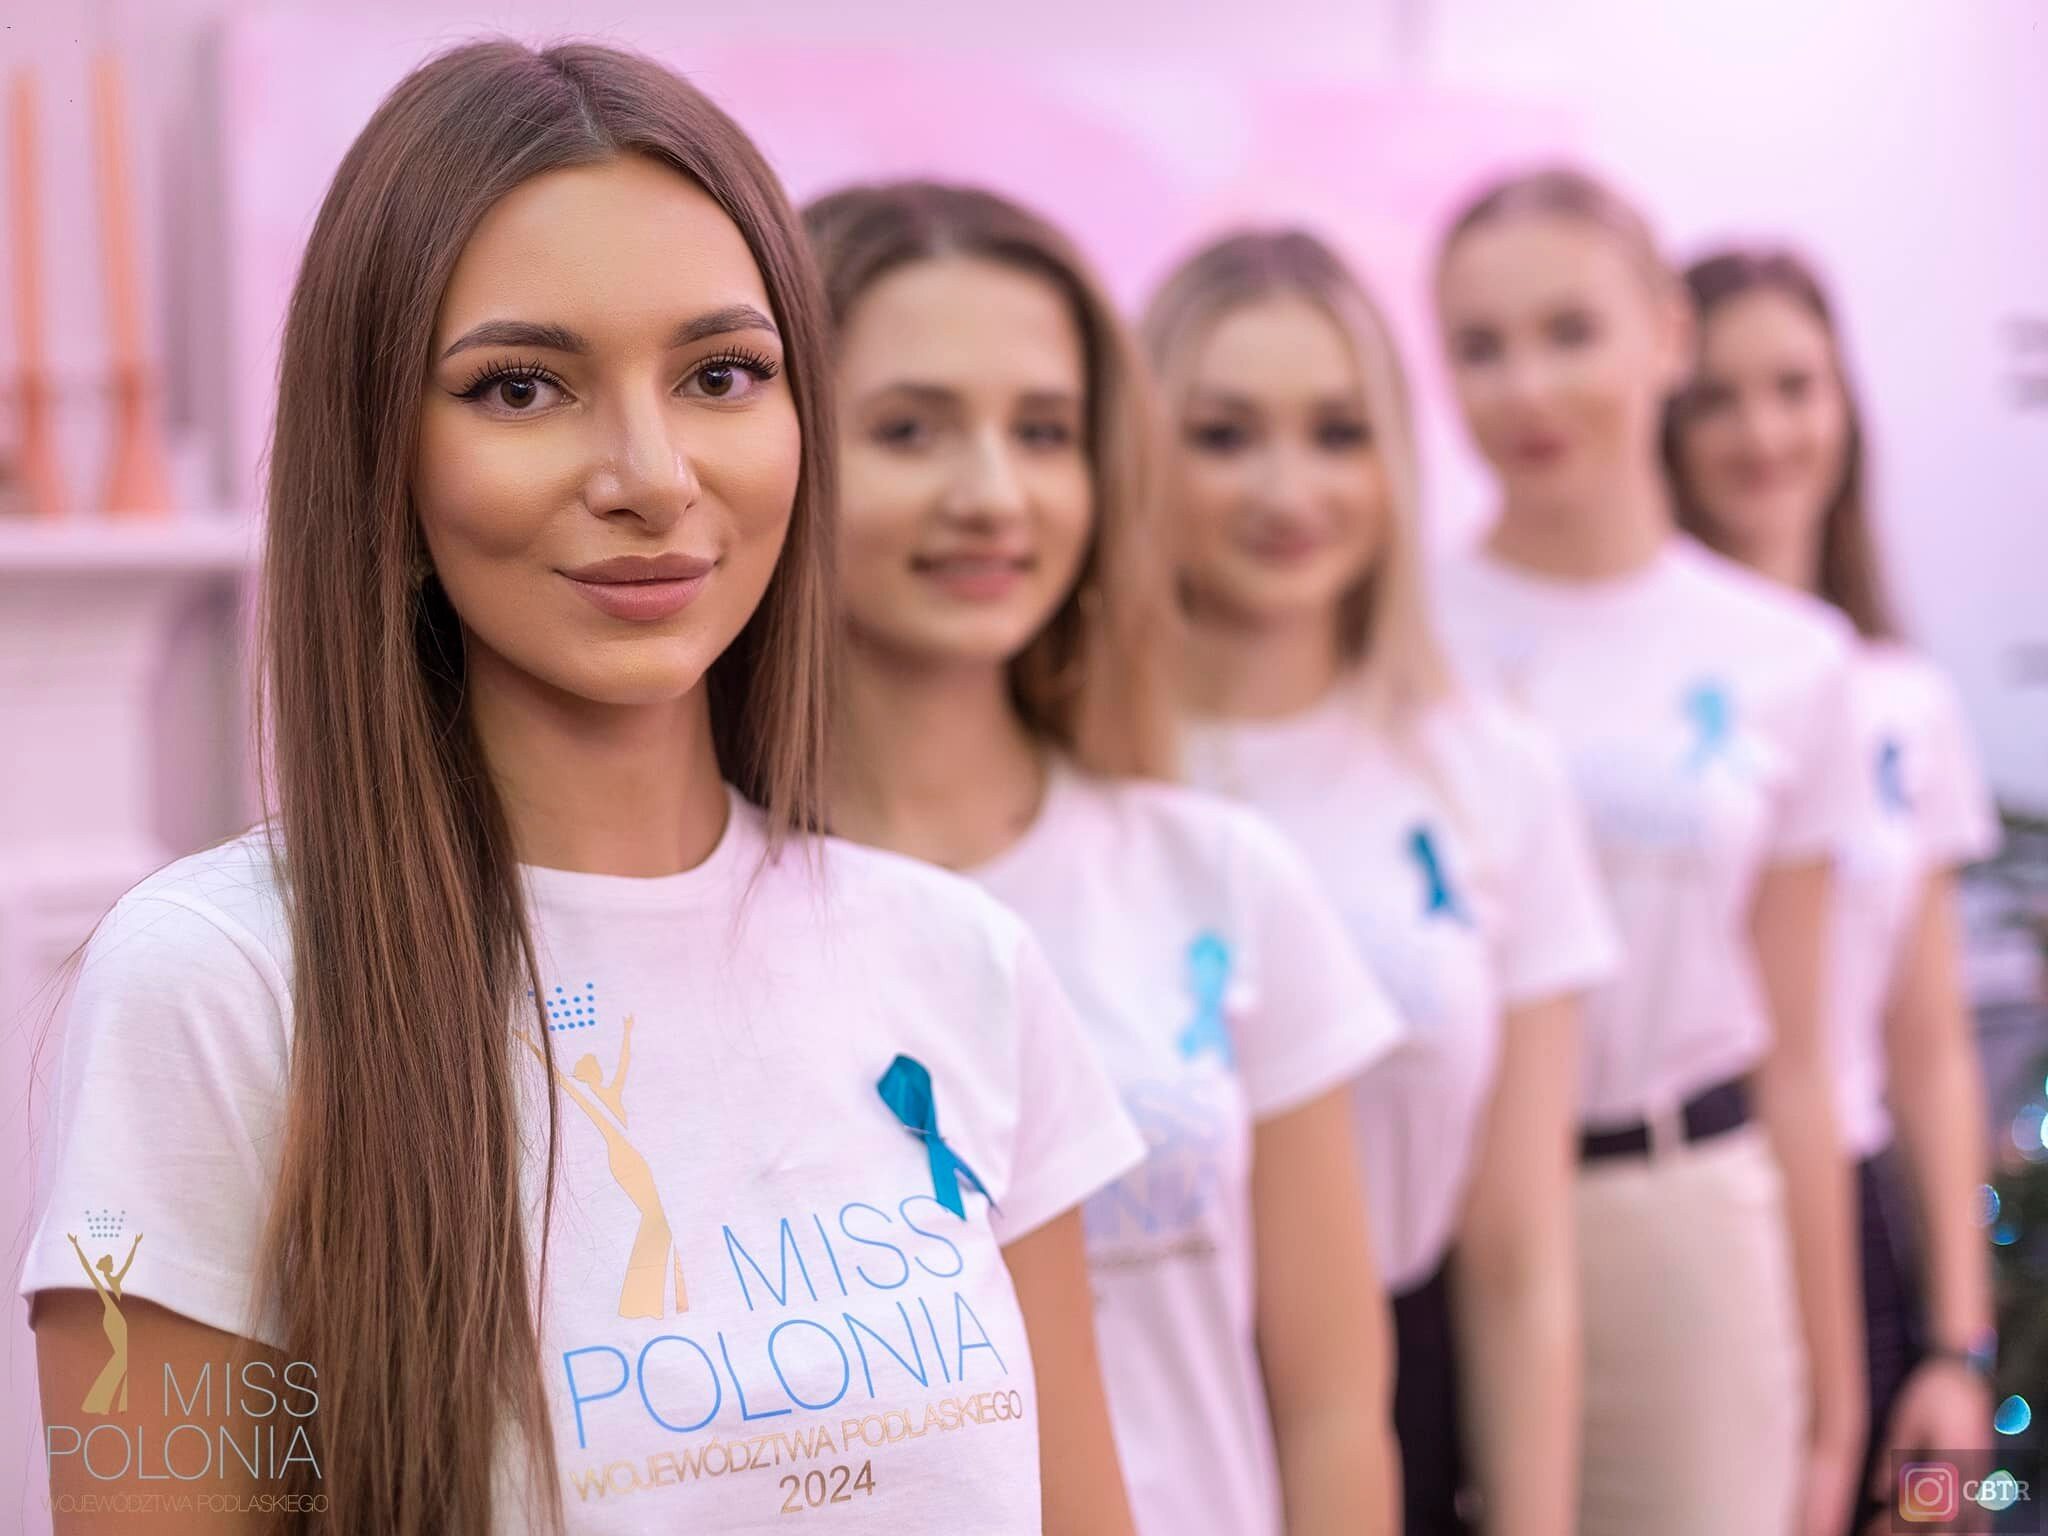 "Because beauty begins with health" - The great mission of the beautiful women of Podlasie!